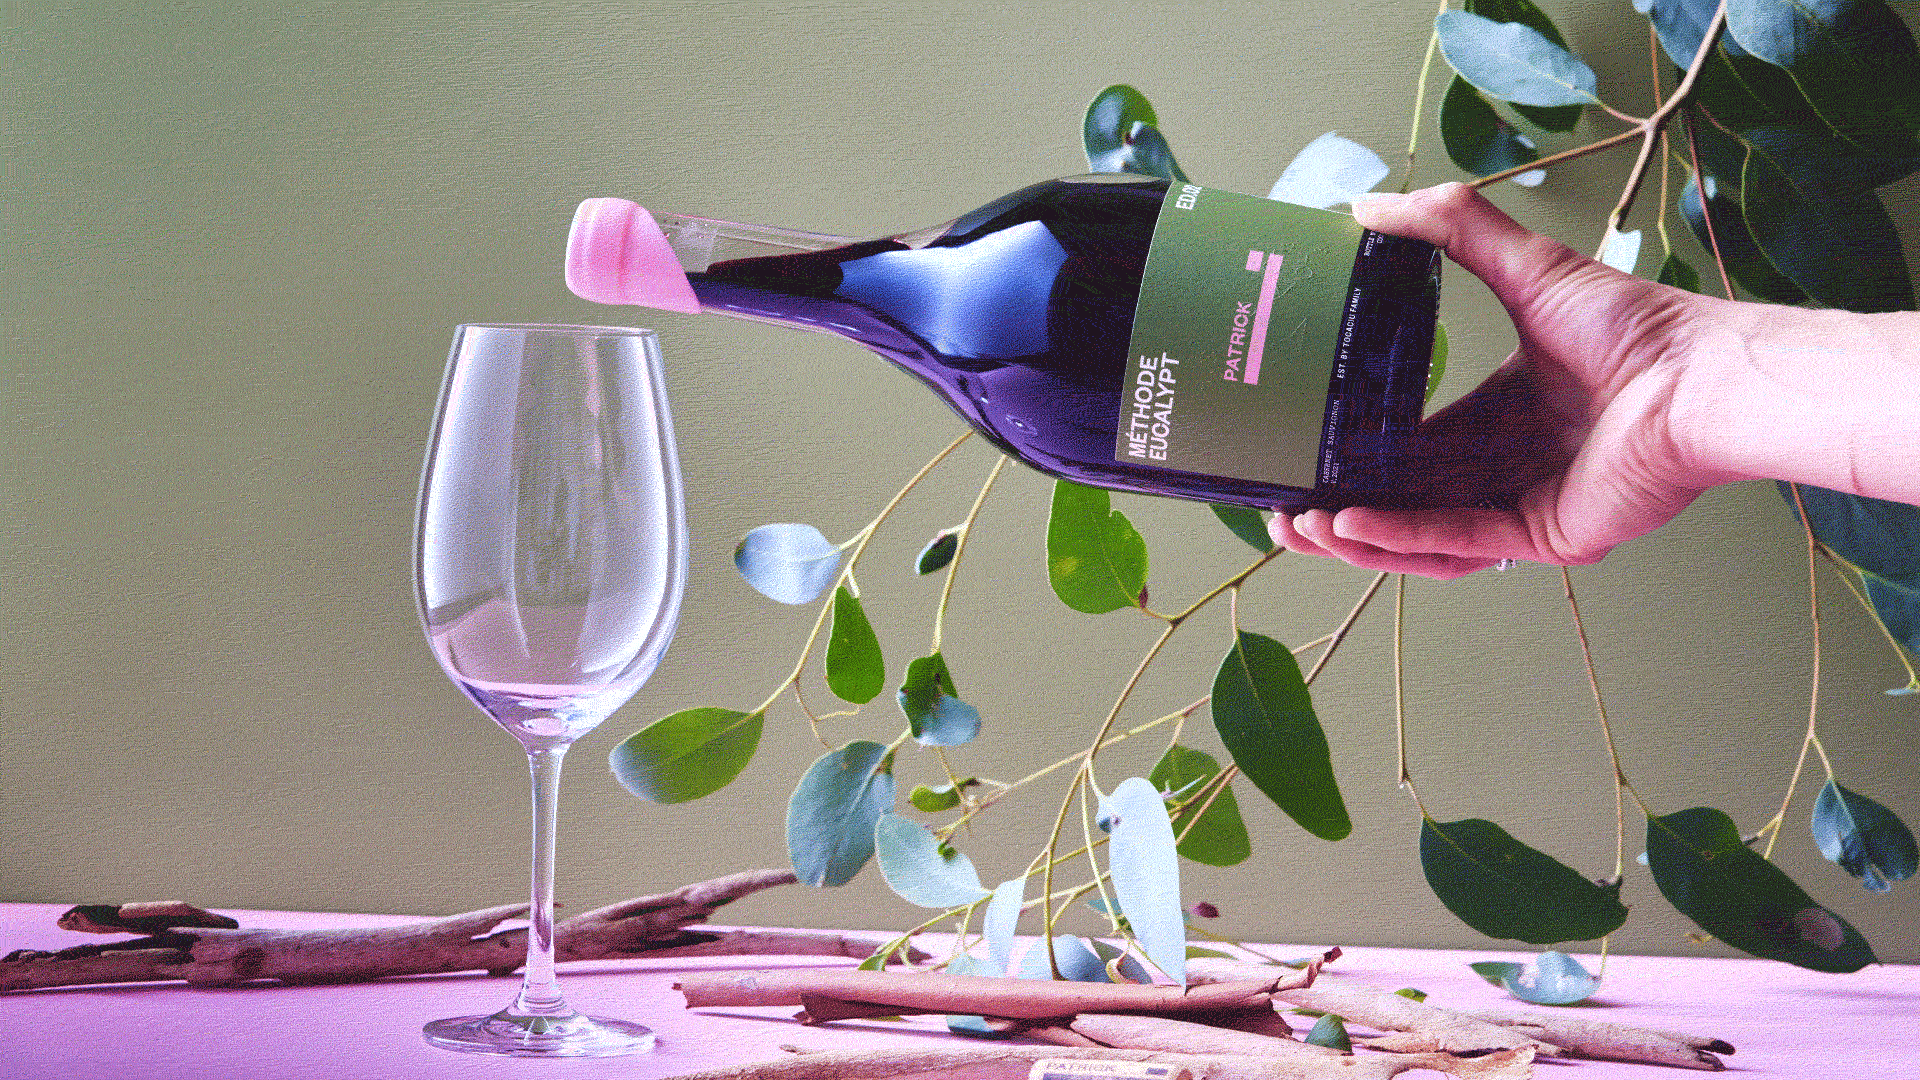 Gif of someone pouring a bottle of red wine into a glass against an olive background.